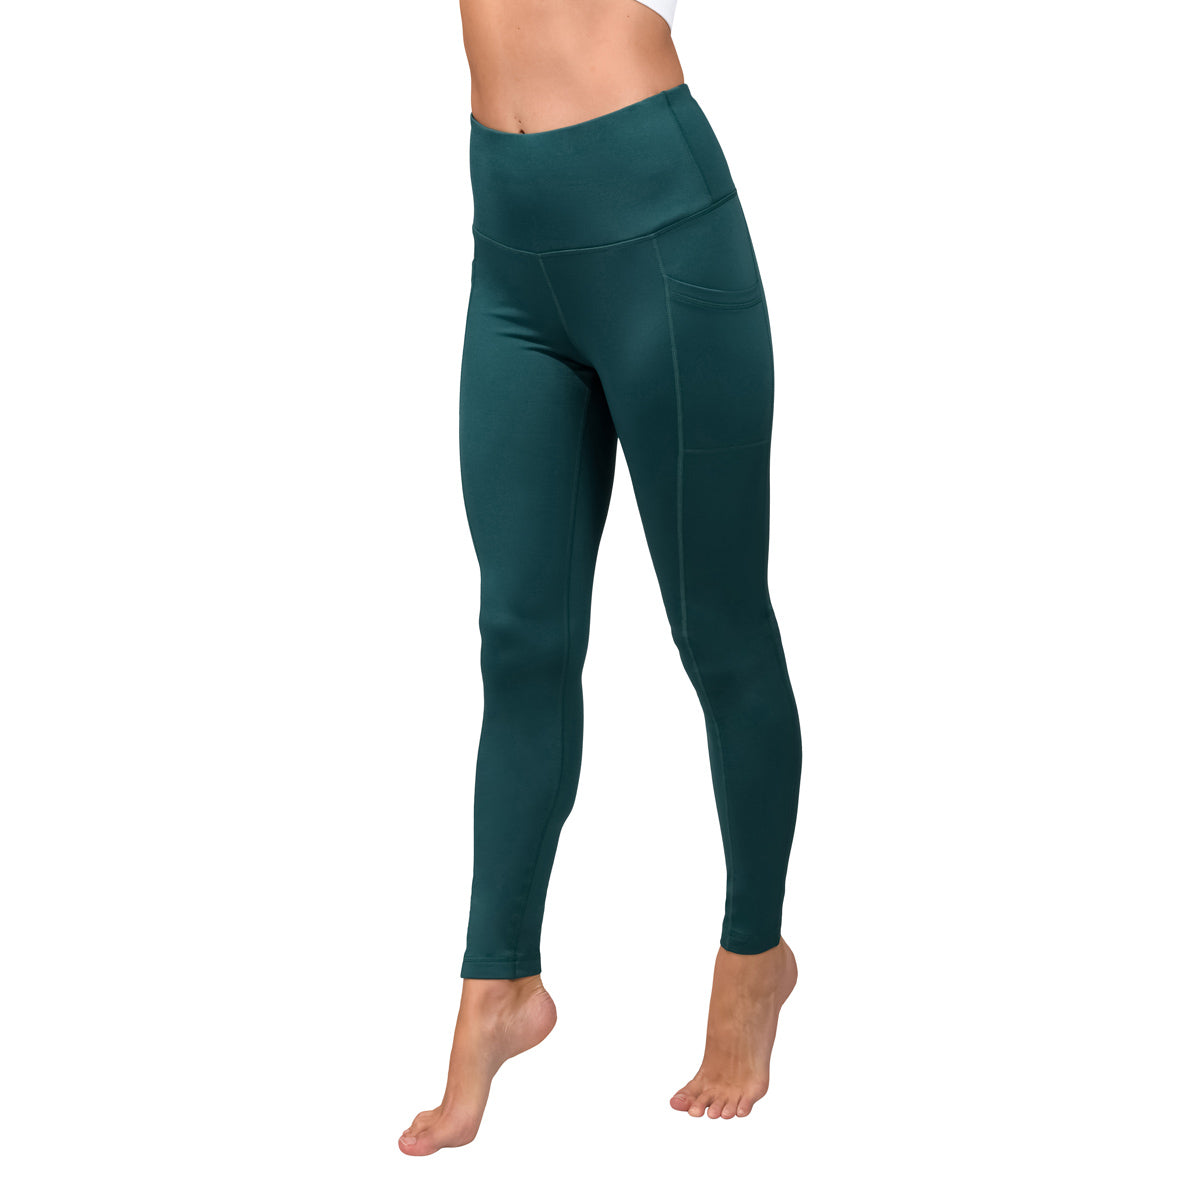 90 Degree By Reflex High Waist Fleece Lined Leggings with Side Pocket -  Yoga Pants - White Surf Space Dye - XL in Oman